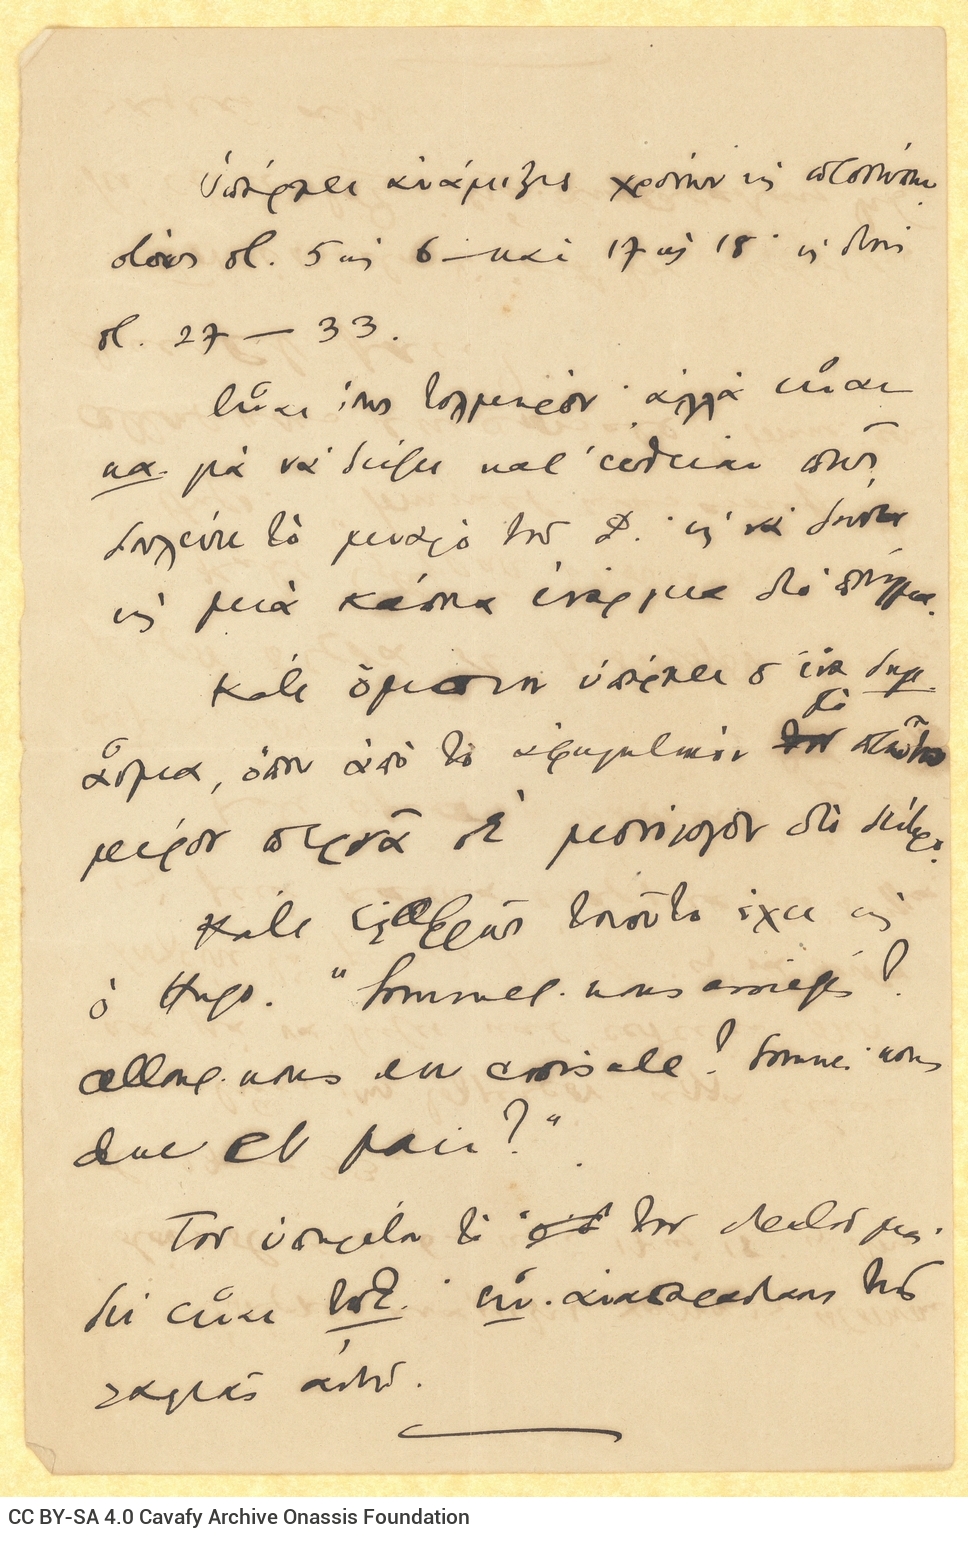 Handwritten notes on both sides of a sheet. Comments on a poem. References to specific pages of a publication and to Victo